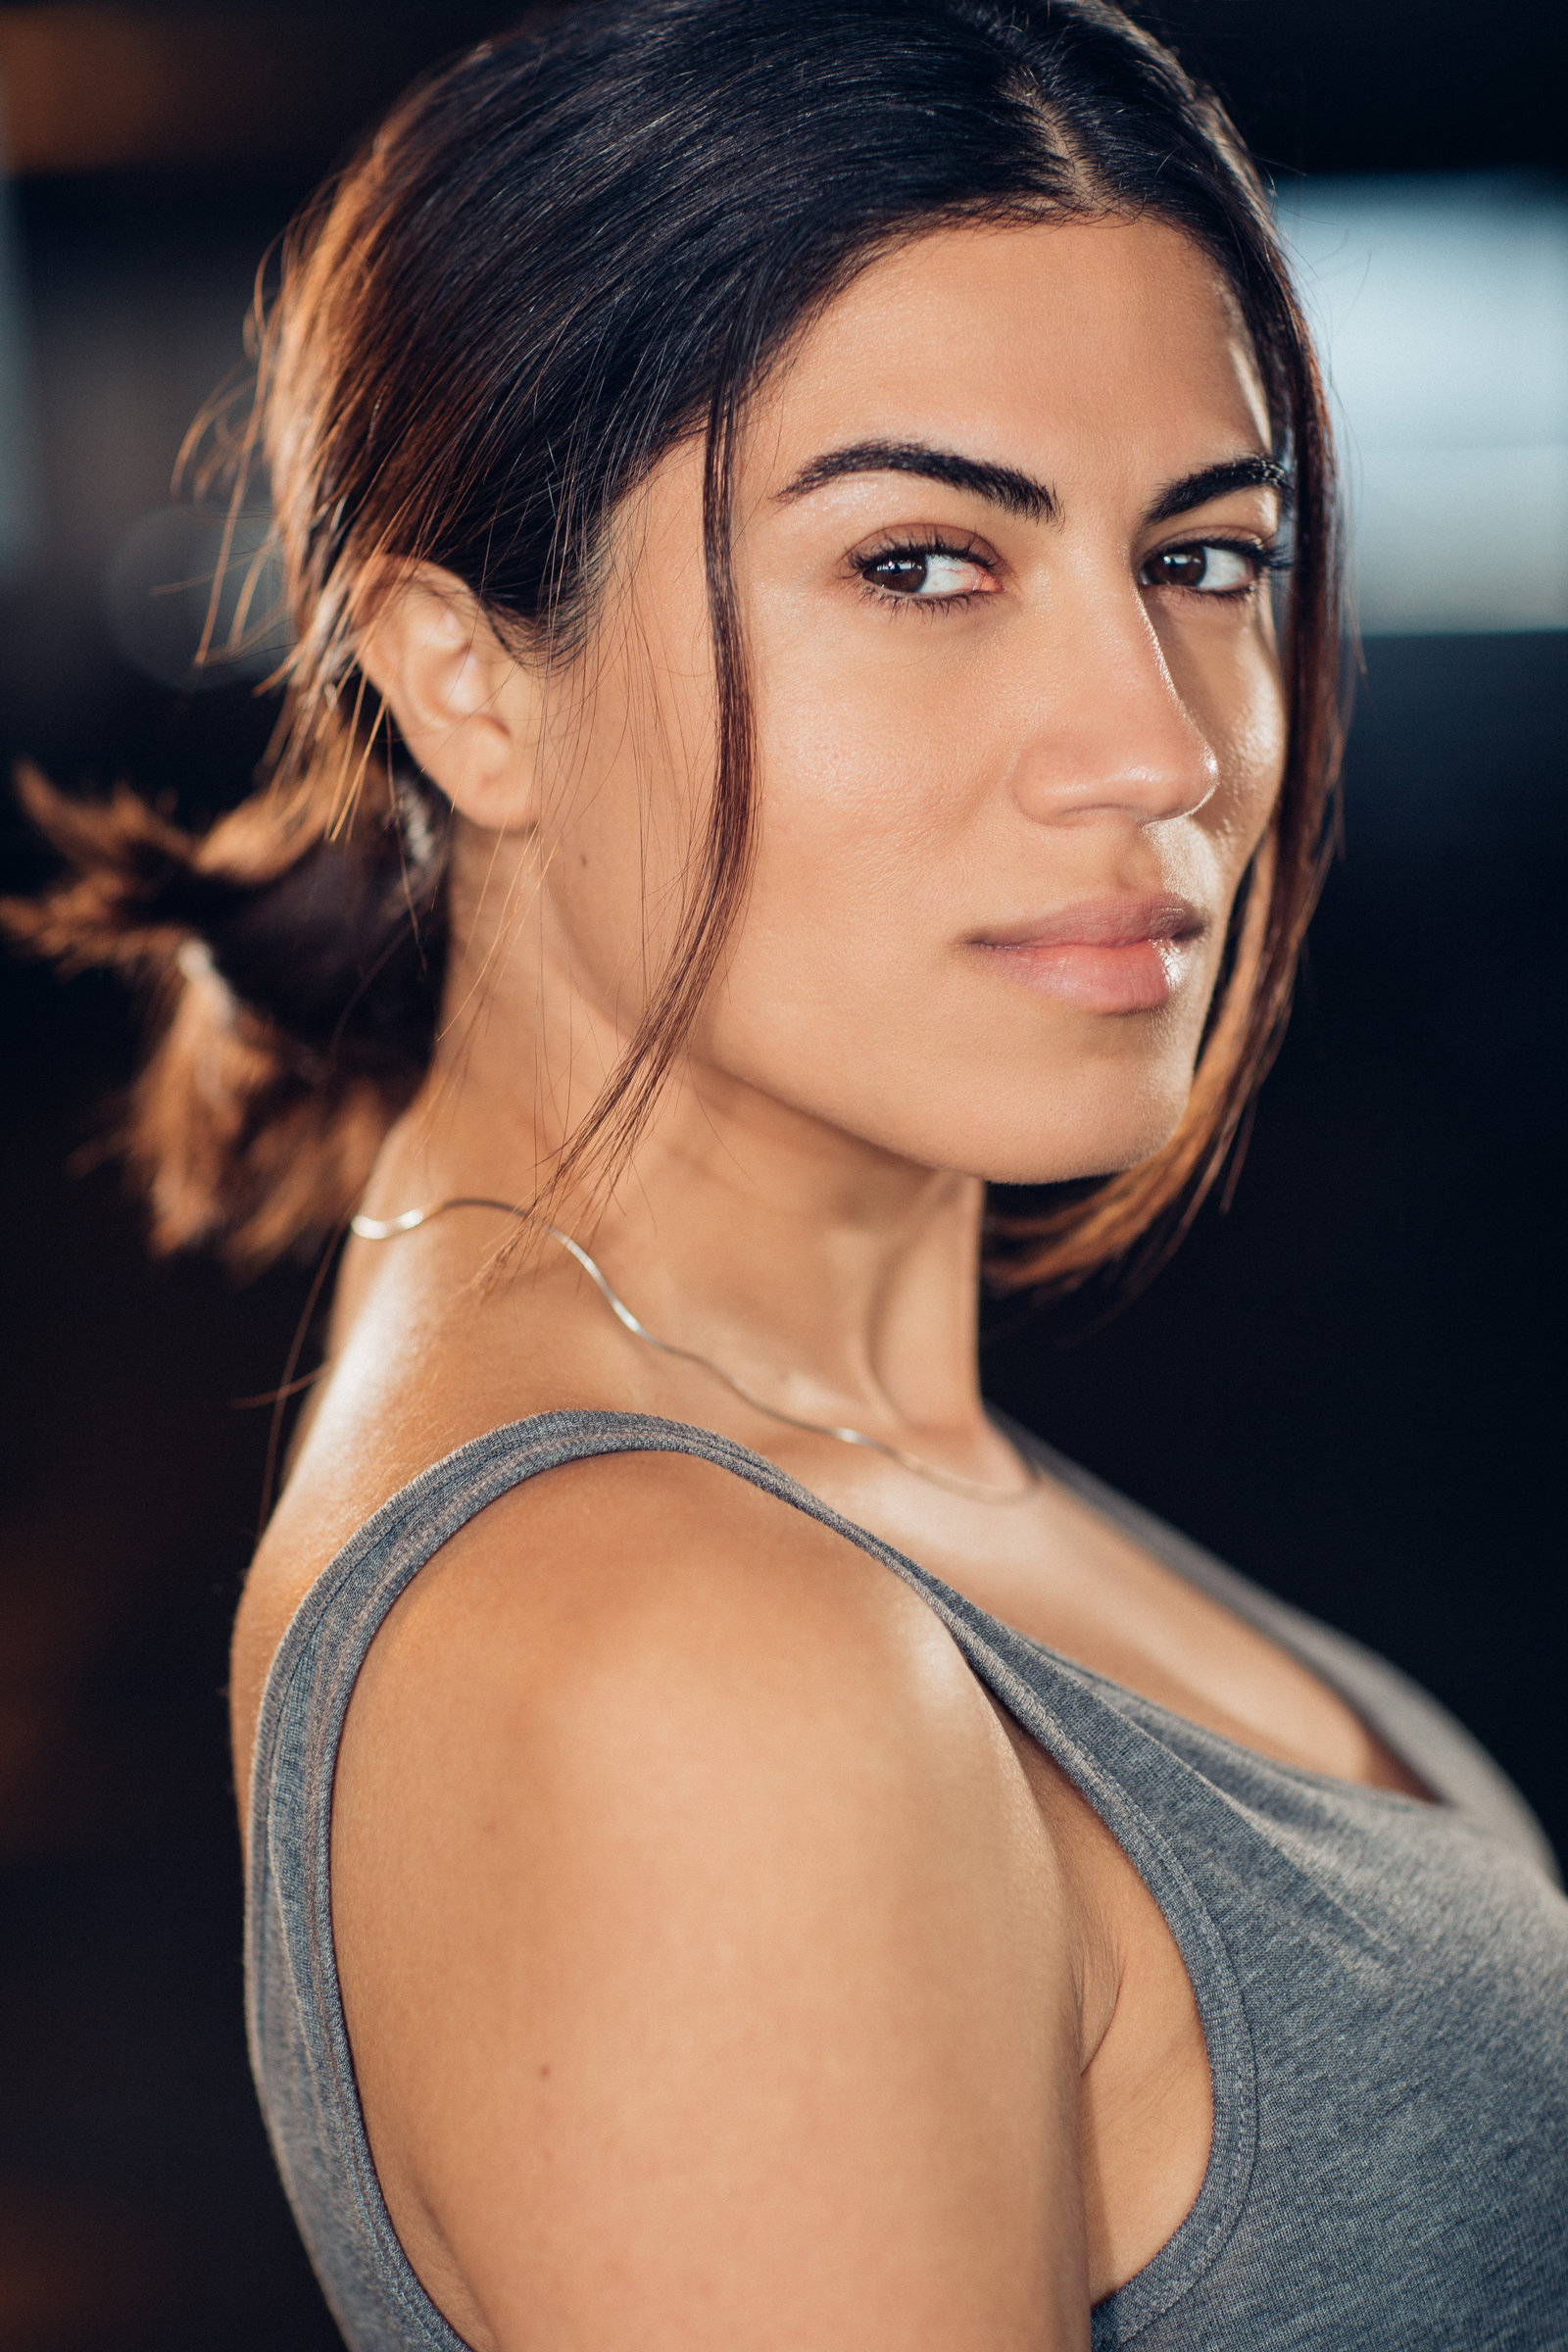 Headshot Photograph Of Young Woman In Gray Tank Top Los Angeles